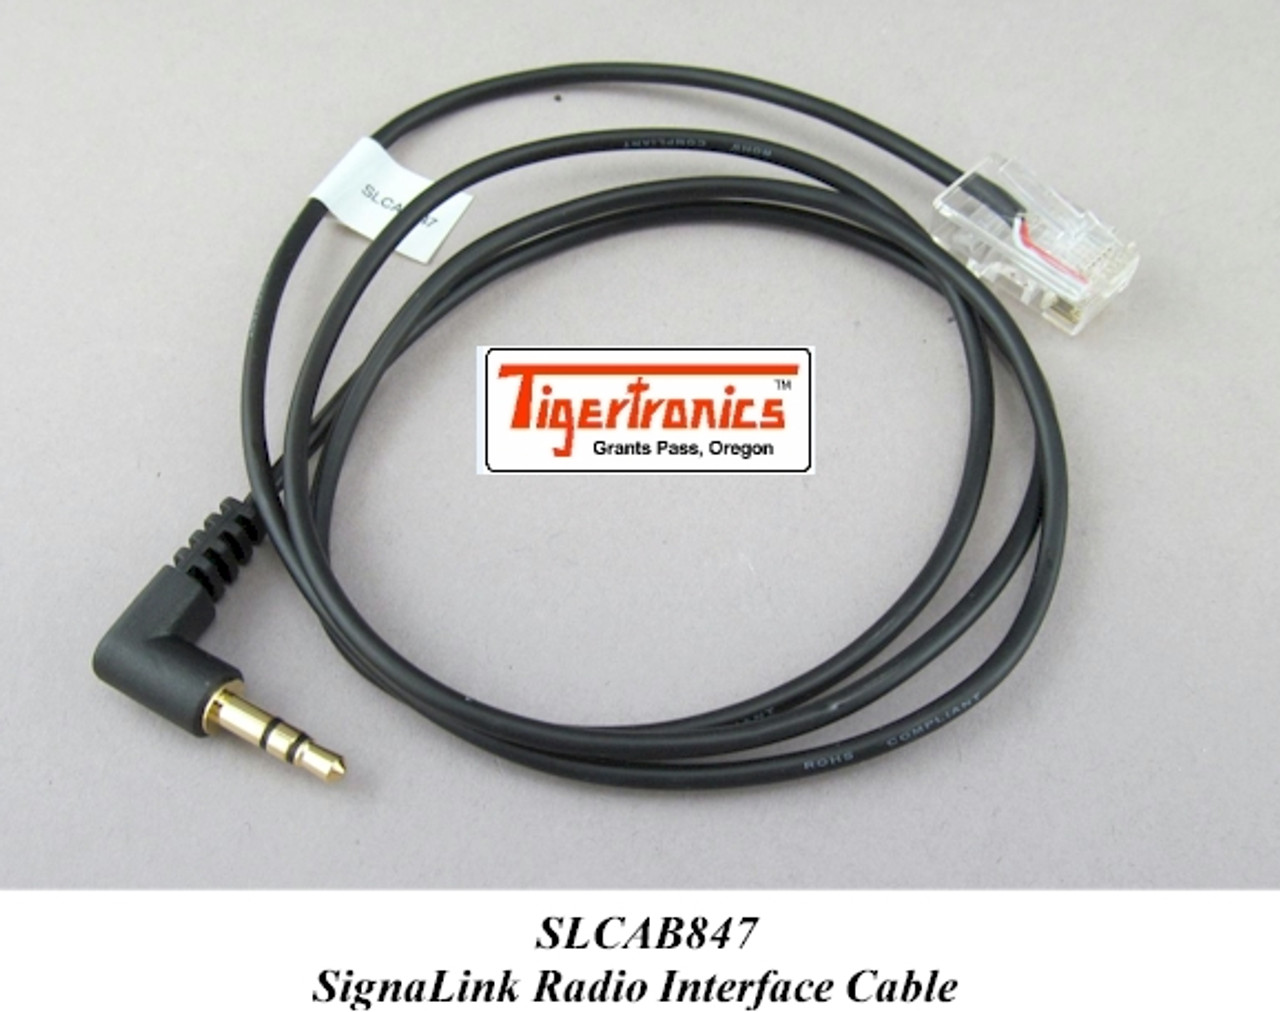 SLCAB847 Cable -This cable is compatible with the Yaesu FT-847's rear panel "Data I/O" jack for HF operation only